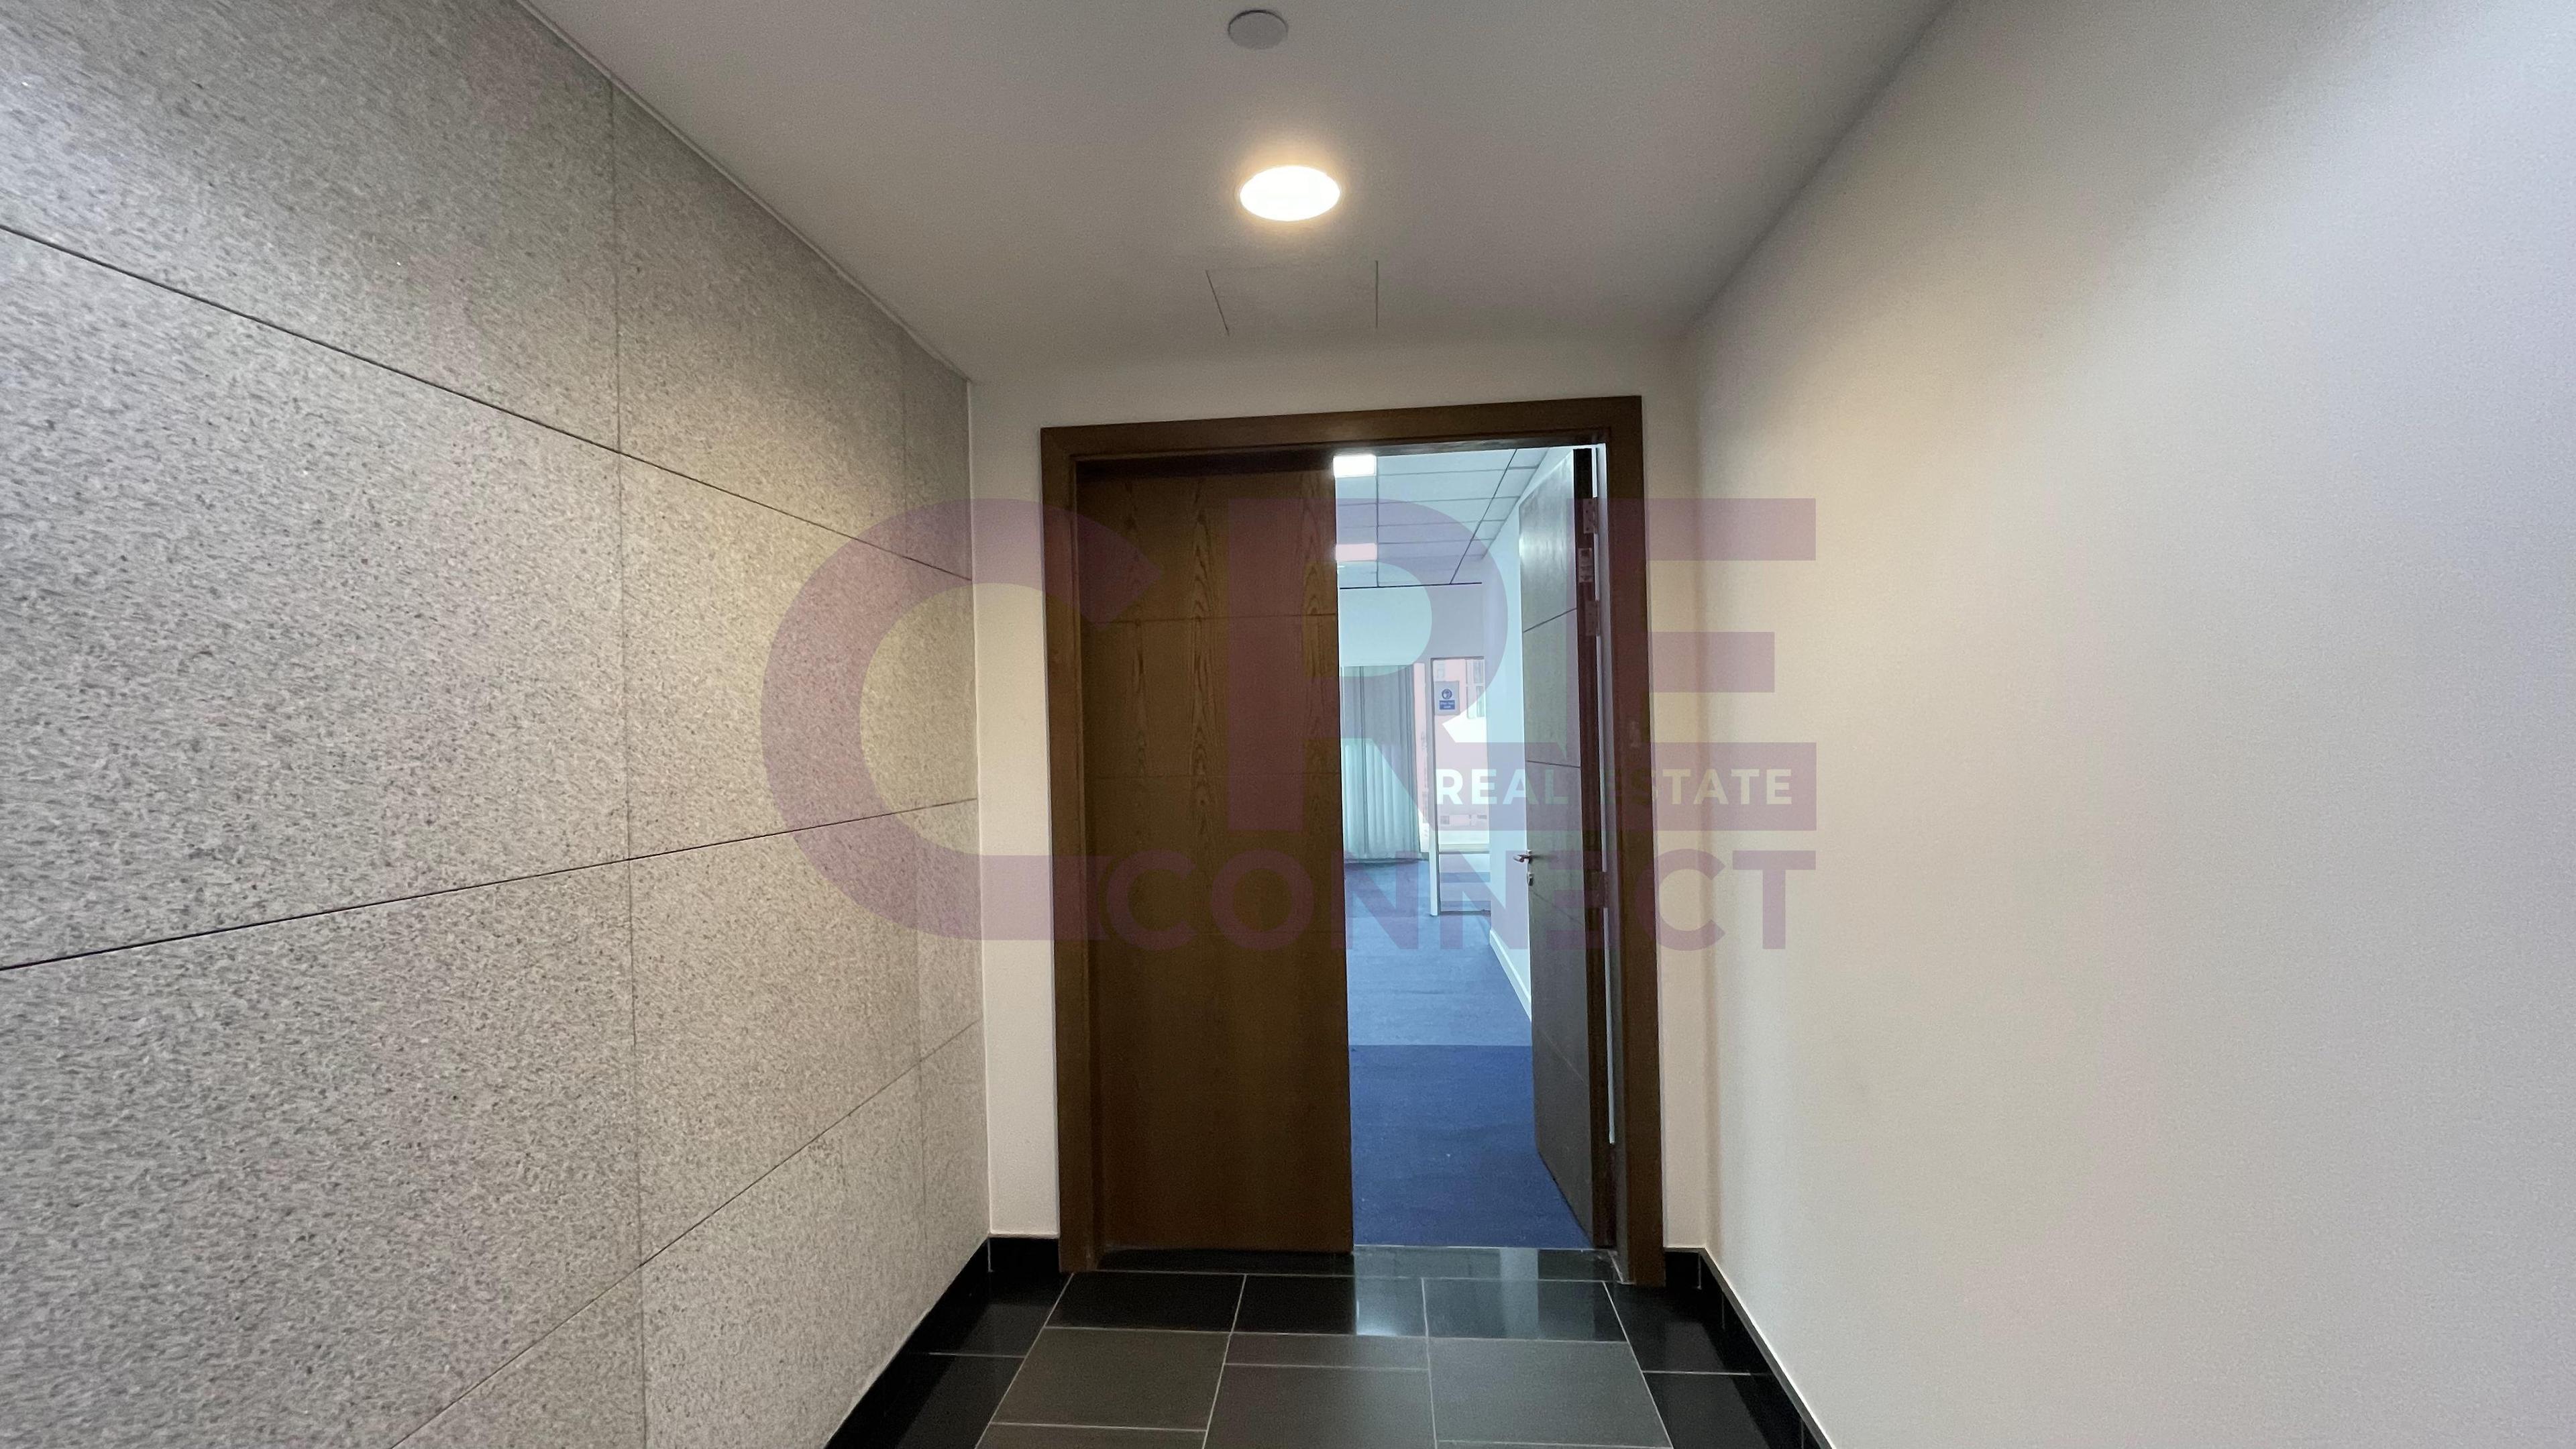 2 bath Office Space for rent in Danet Abu Dhabi, Abu Dhabi for price AED 135300 yearly 